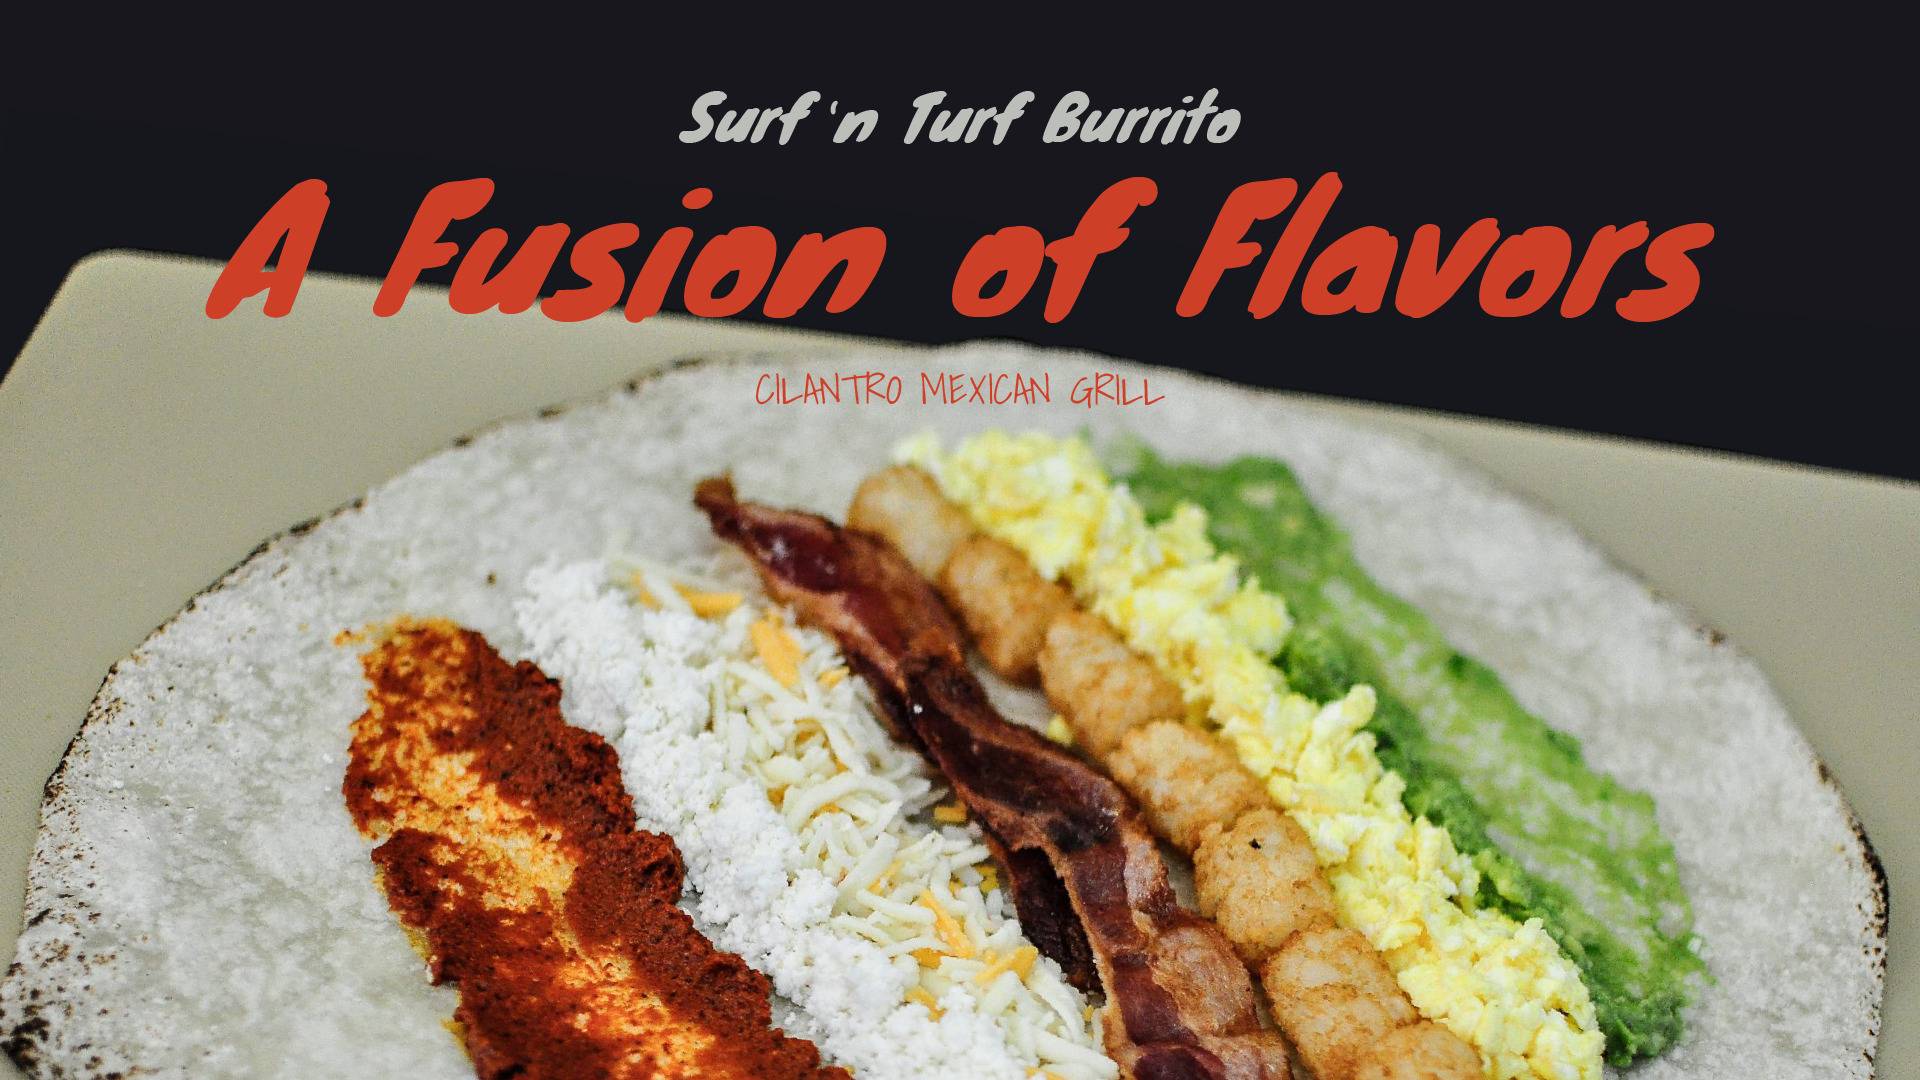 Surf n Turf Burrito A Fusion of Flavors at Cilantro Mexican Grill